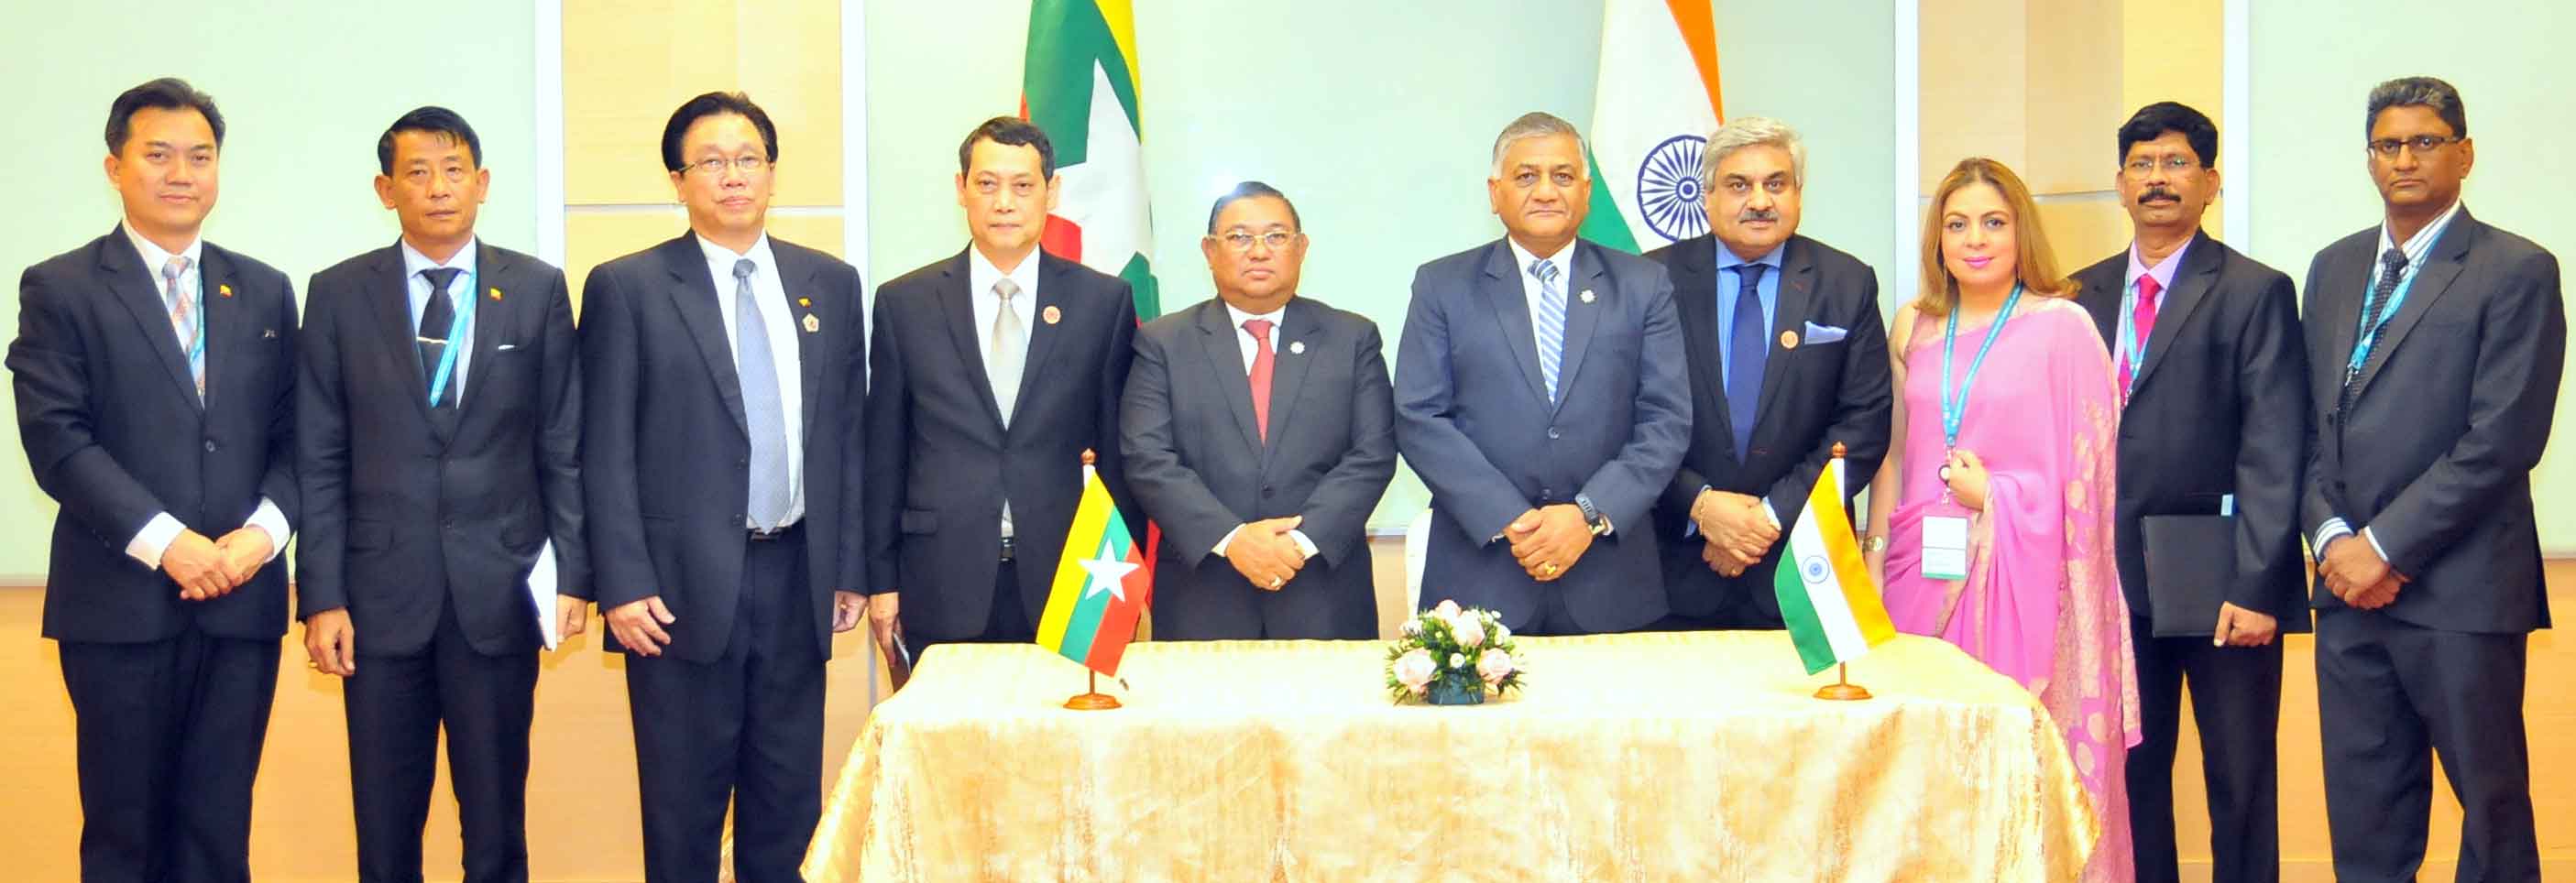 r-of-Myanmar-witnessing-the-signing-ceremony-of-CESDT-Agreement-between-India-and-Myanmar-in-Kuala-Lumpur-on-6th-August-2015